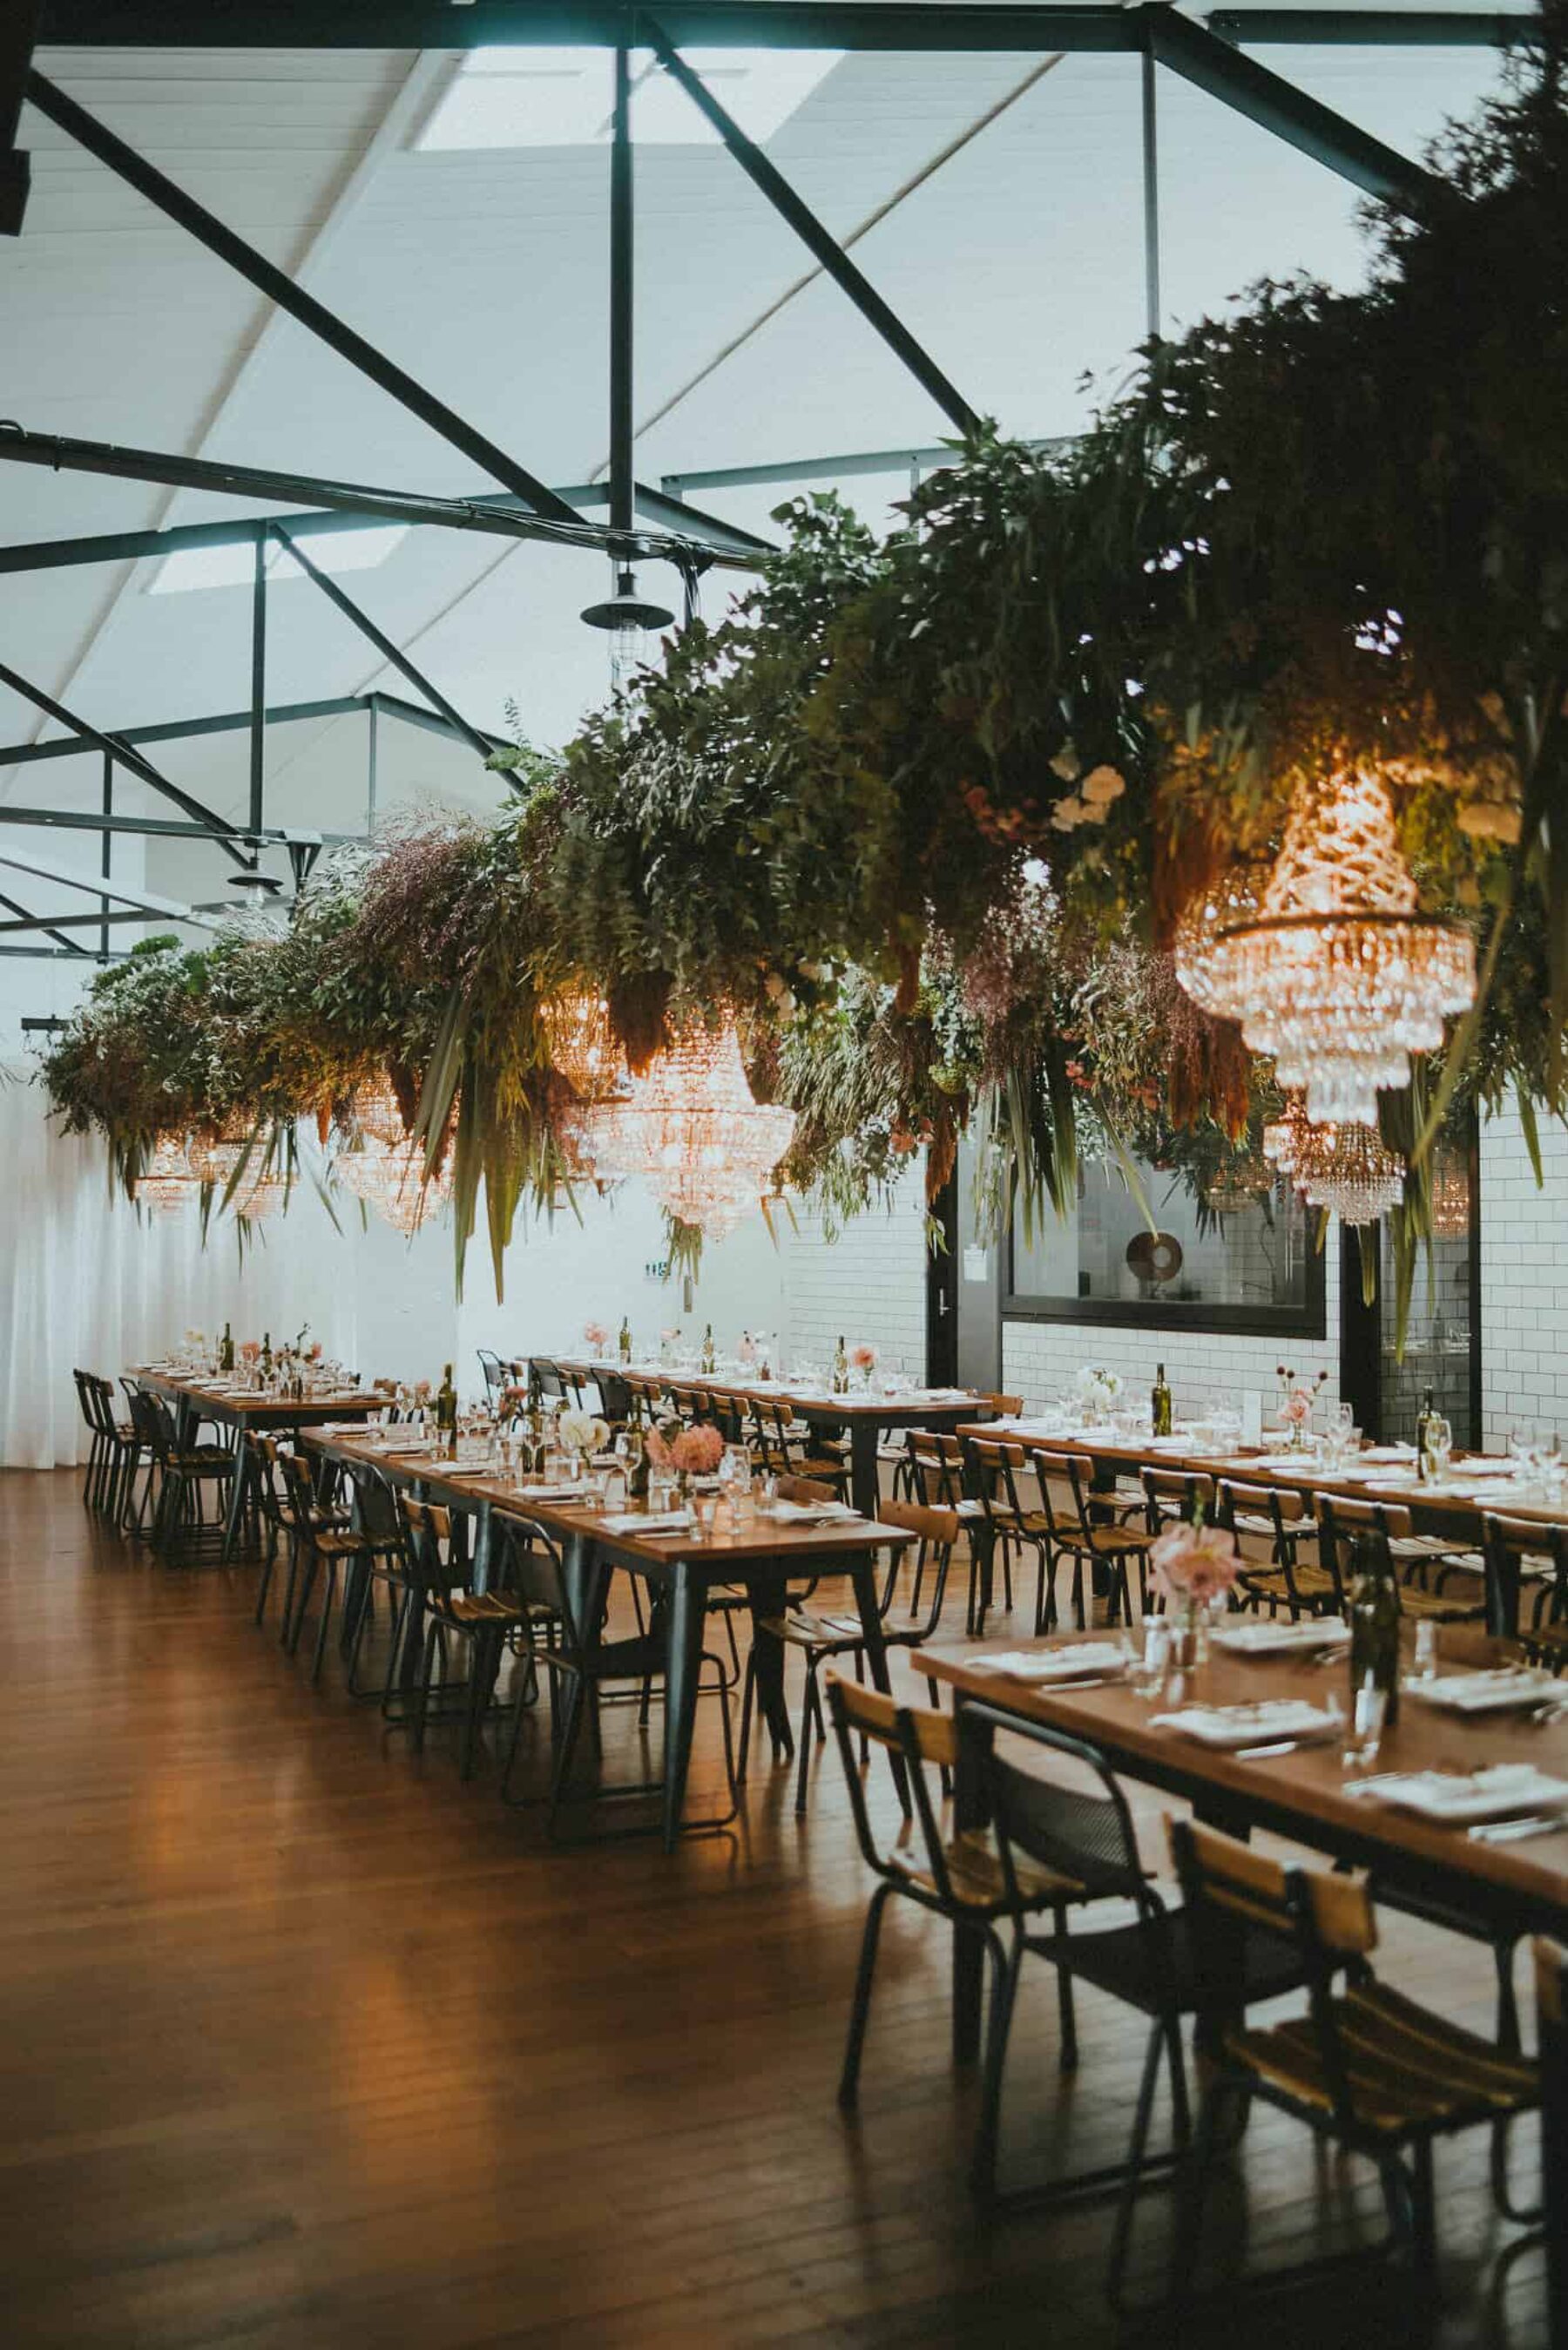 Hanging floral and foliage installations with chandeliers